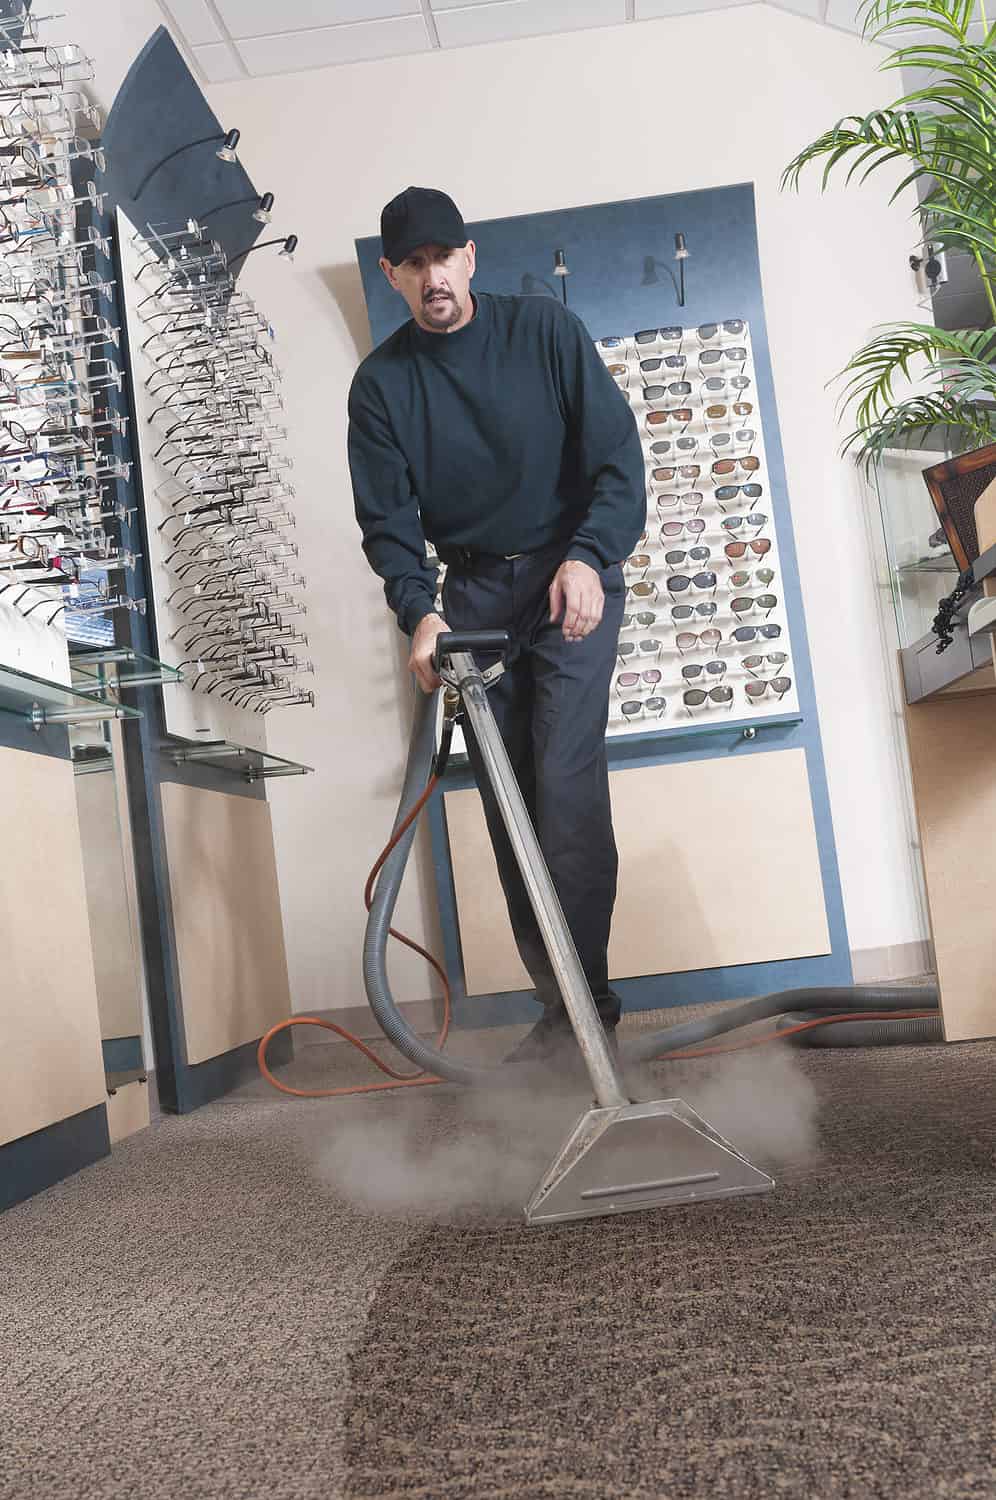 Man steam cleaning the carpet in an optometry office.